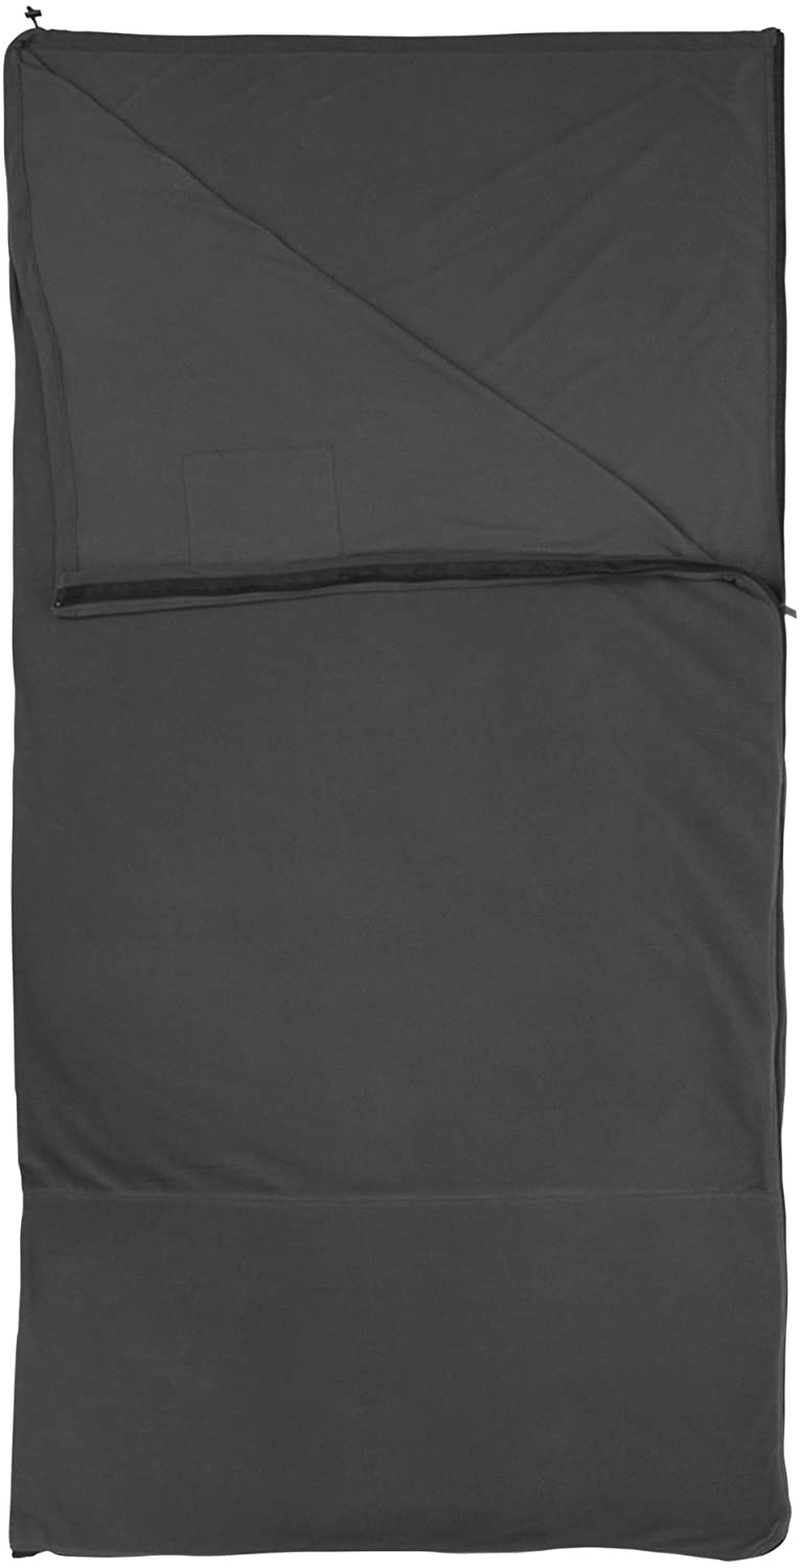 TETON Sports Polara 3-In-1 Sleeping Bag; Great for All Season Camping, Fishing, and Hunting; Versatile Outdoor Sleeping Bag; Lightweight, Washable Inner Fleece Lining; Compression Sack Included , Blue, 82" X 36" Sporting Goods > Outdoor Recreation > Camping & Hiking > Sleeping Bags TETON Sports   